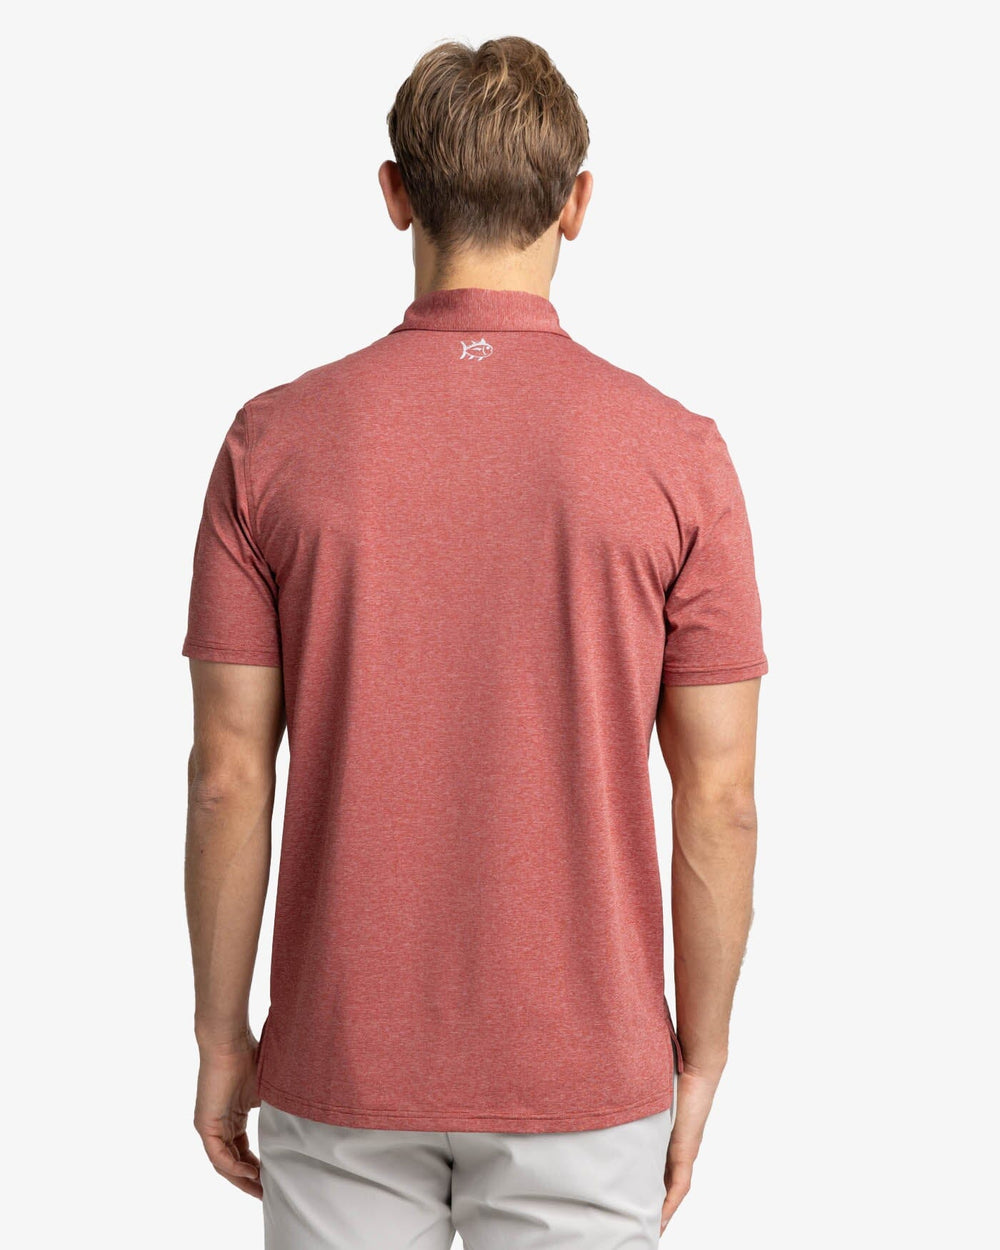 The back view of the Southern Tide brrr-eeze Heather Performance Polo Shirt by Southern Tide - Heather Tuscany Red